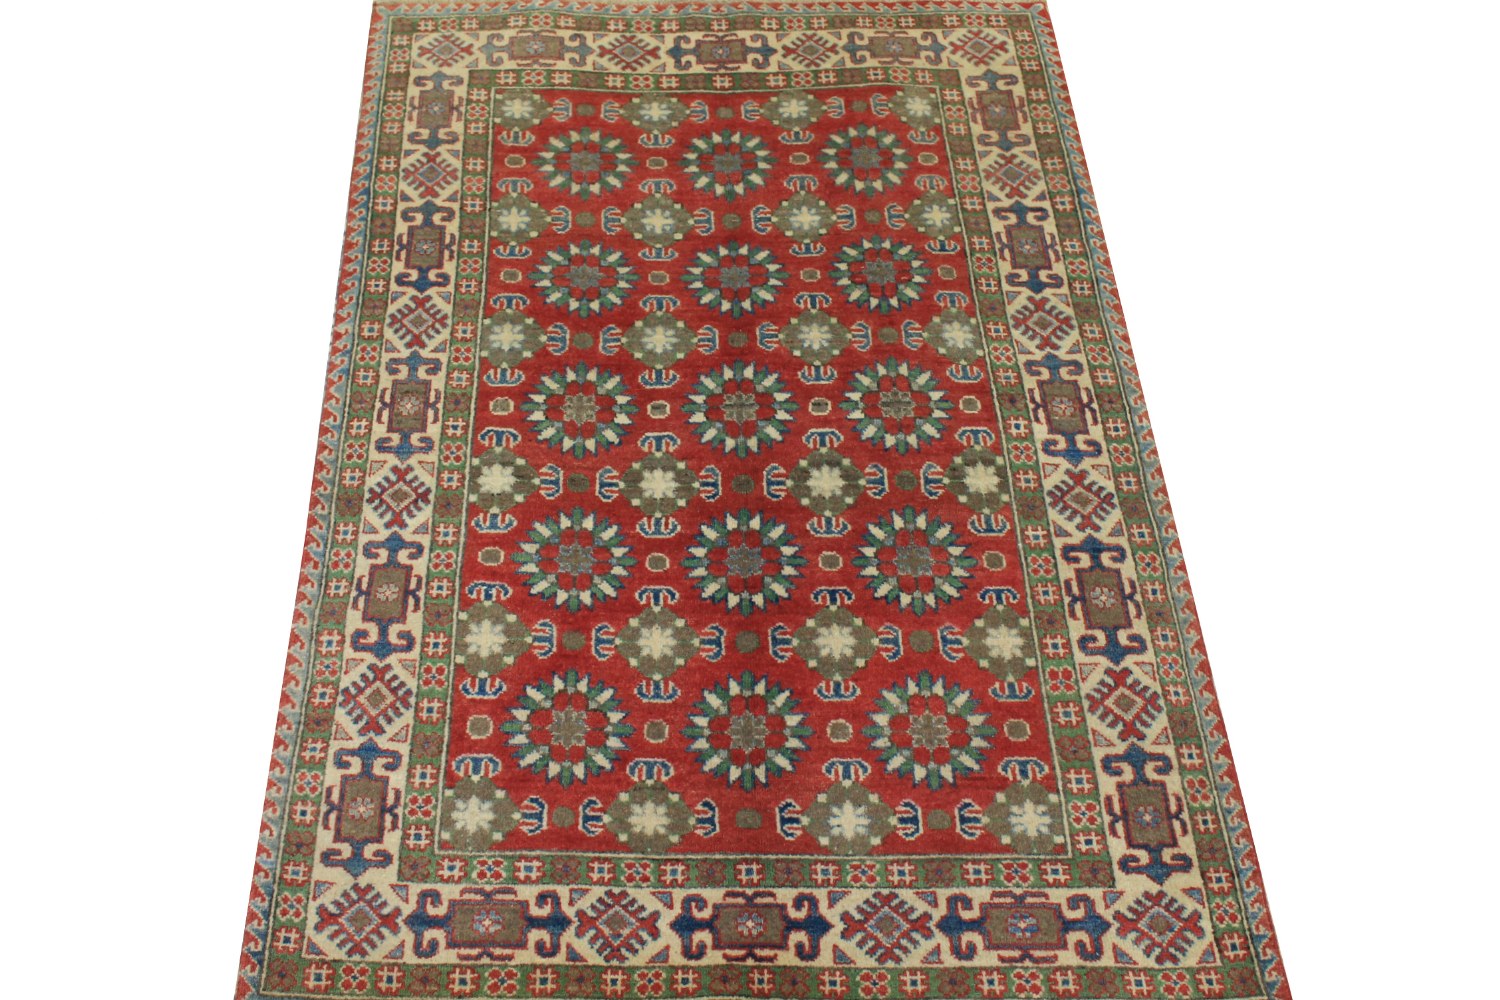 4x6 Kazak Hand Knotted Wool Area Rug - MR024529